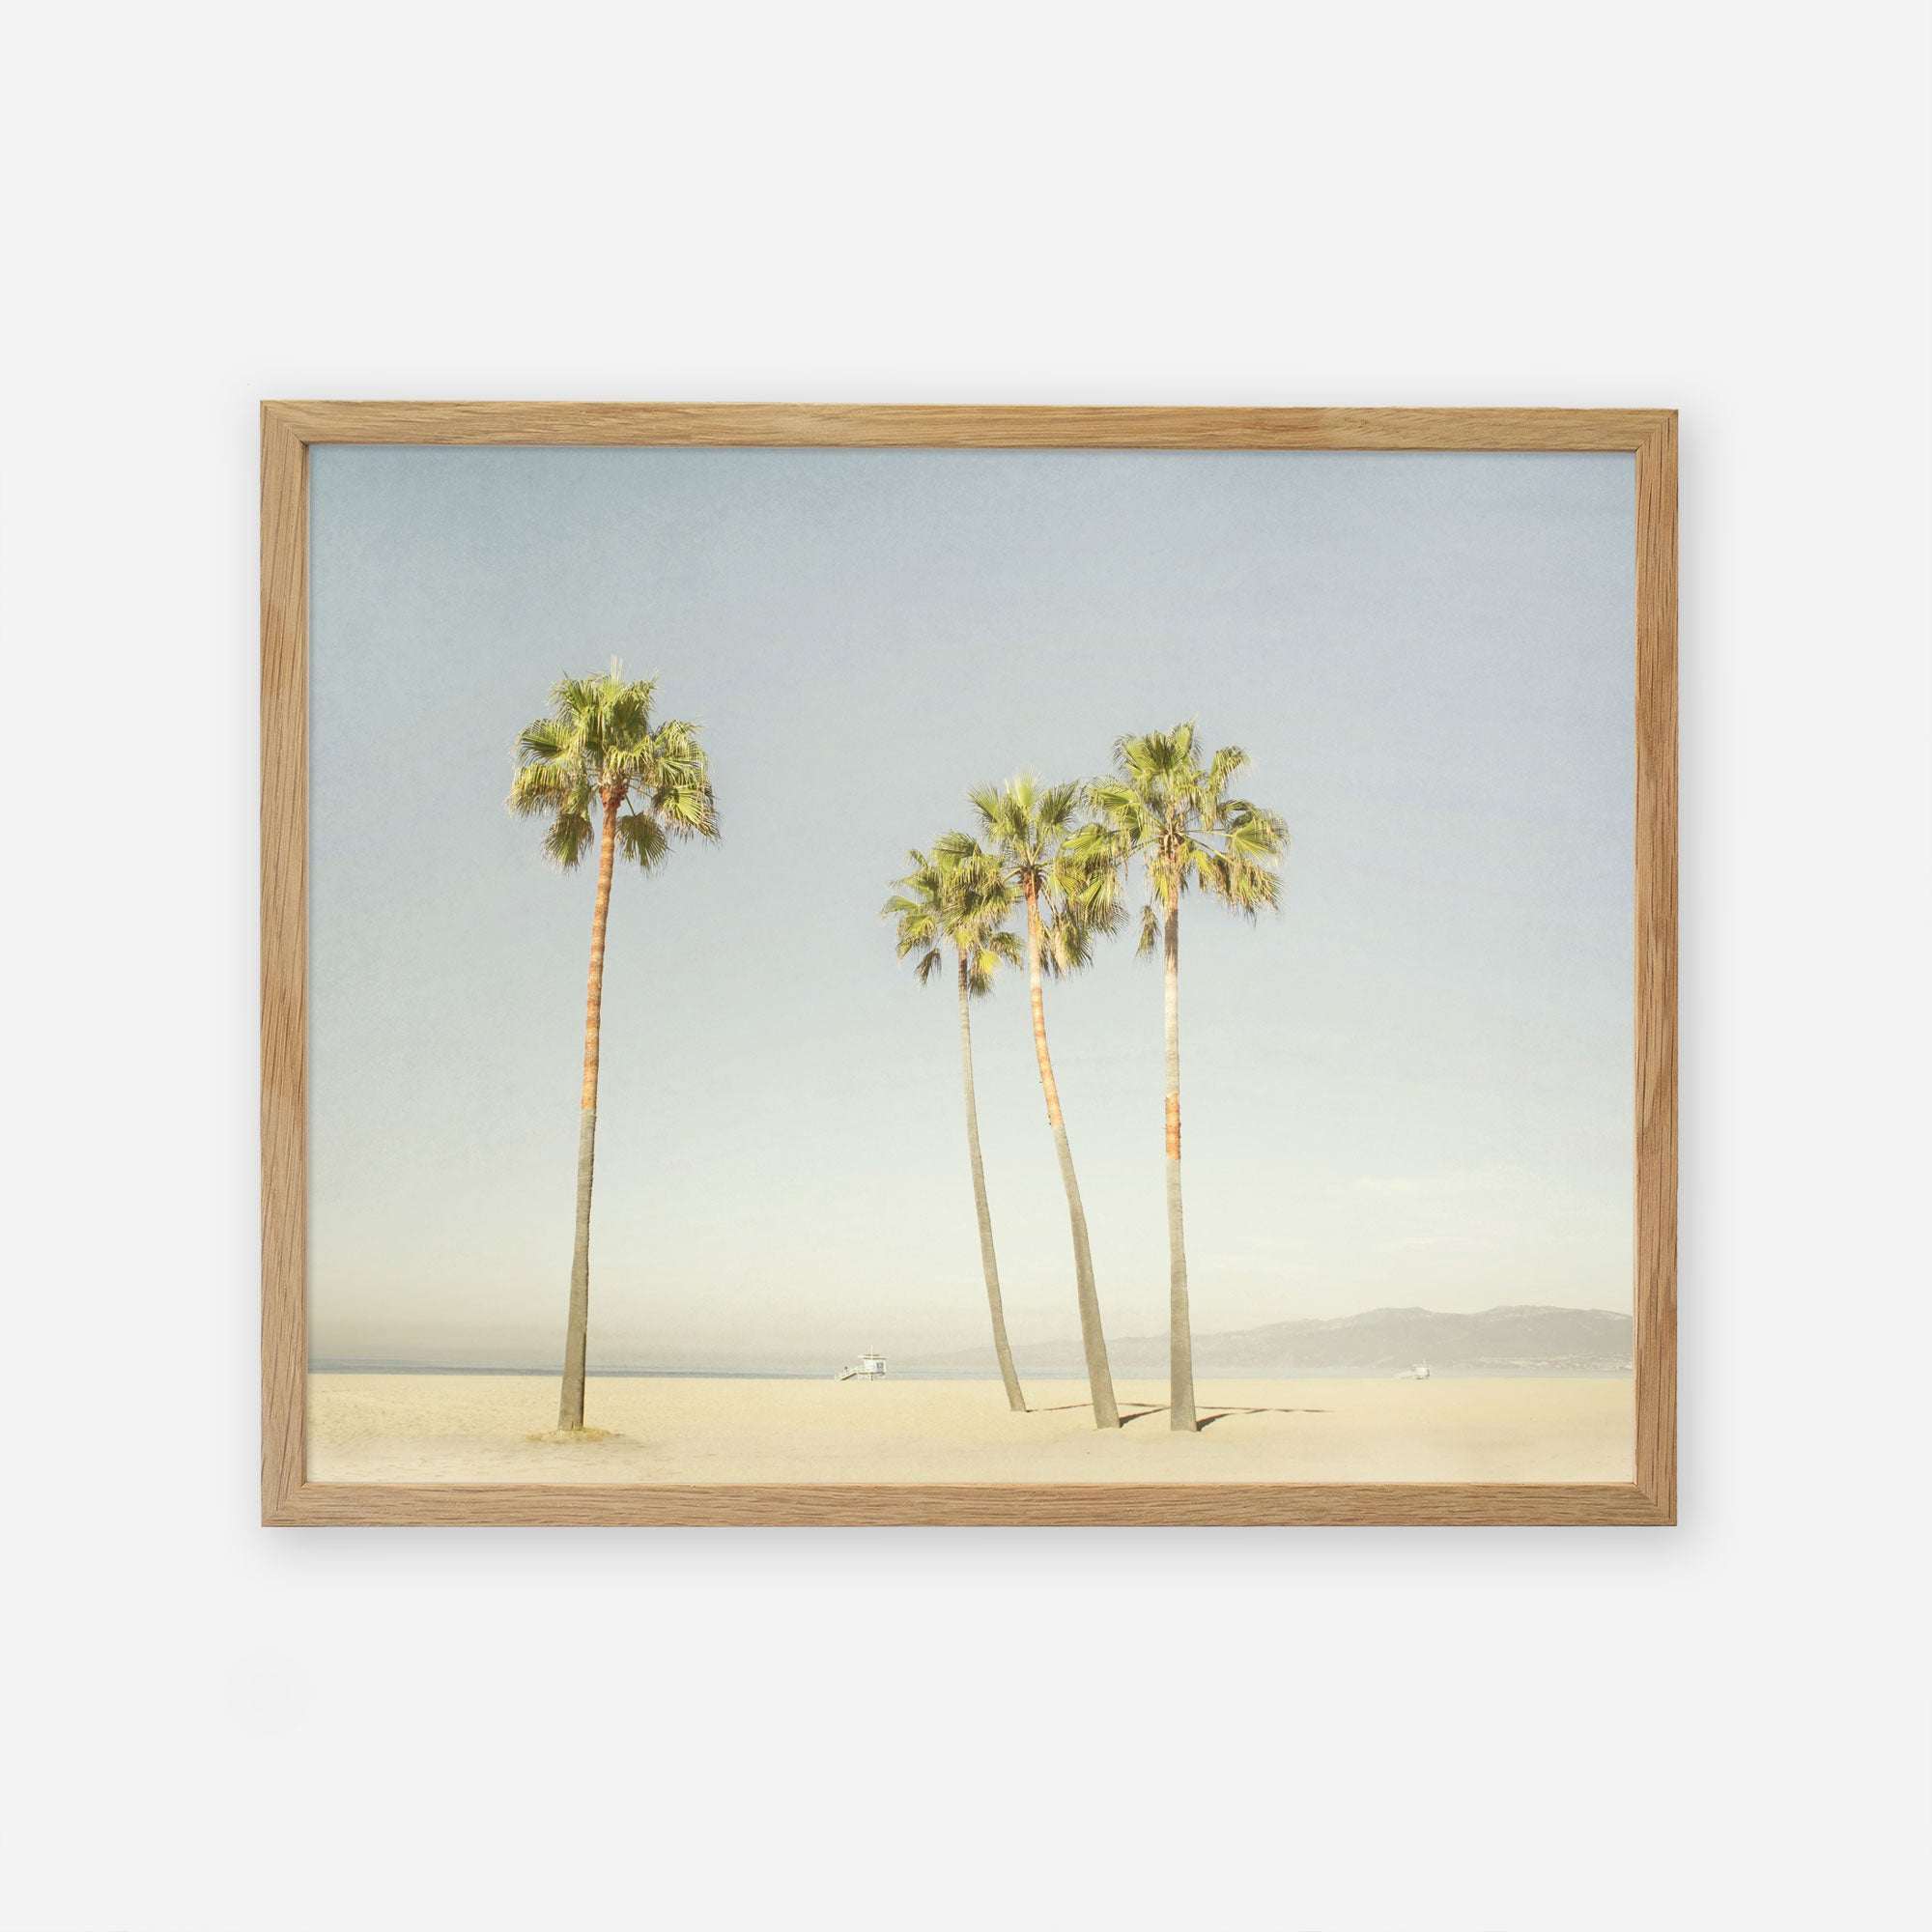 A framed photograph of four tall palm trees on a sandy beach with clear skies, printed on archival photographic paper. The frame is simple and wooden, enhancing the calm beach scene depicted within. The product is the Offley Green California Venice Beach Print, &#39;Boardwalk Palms&#39;.